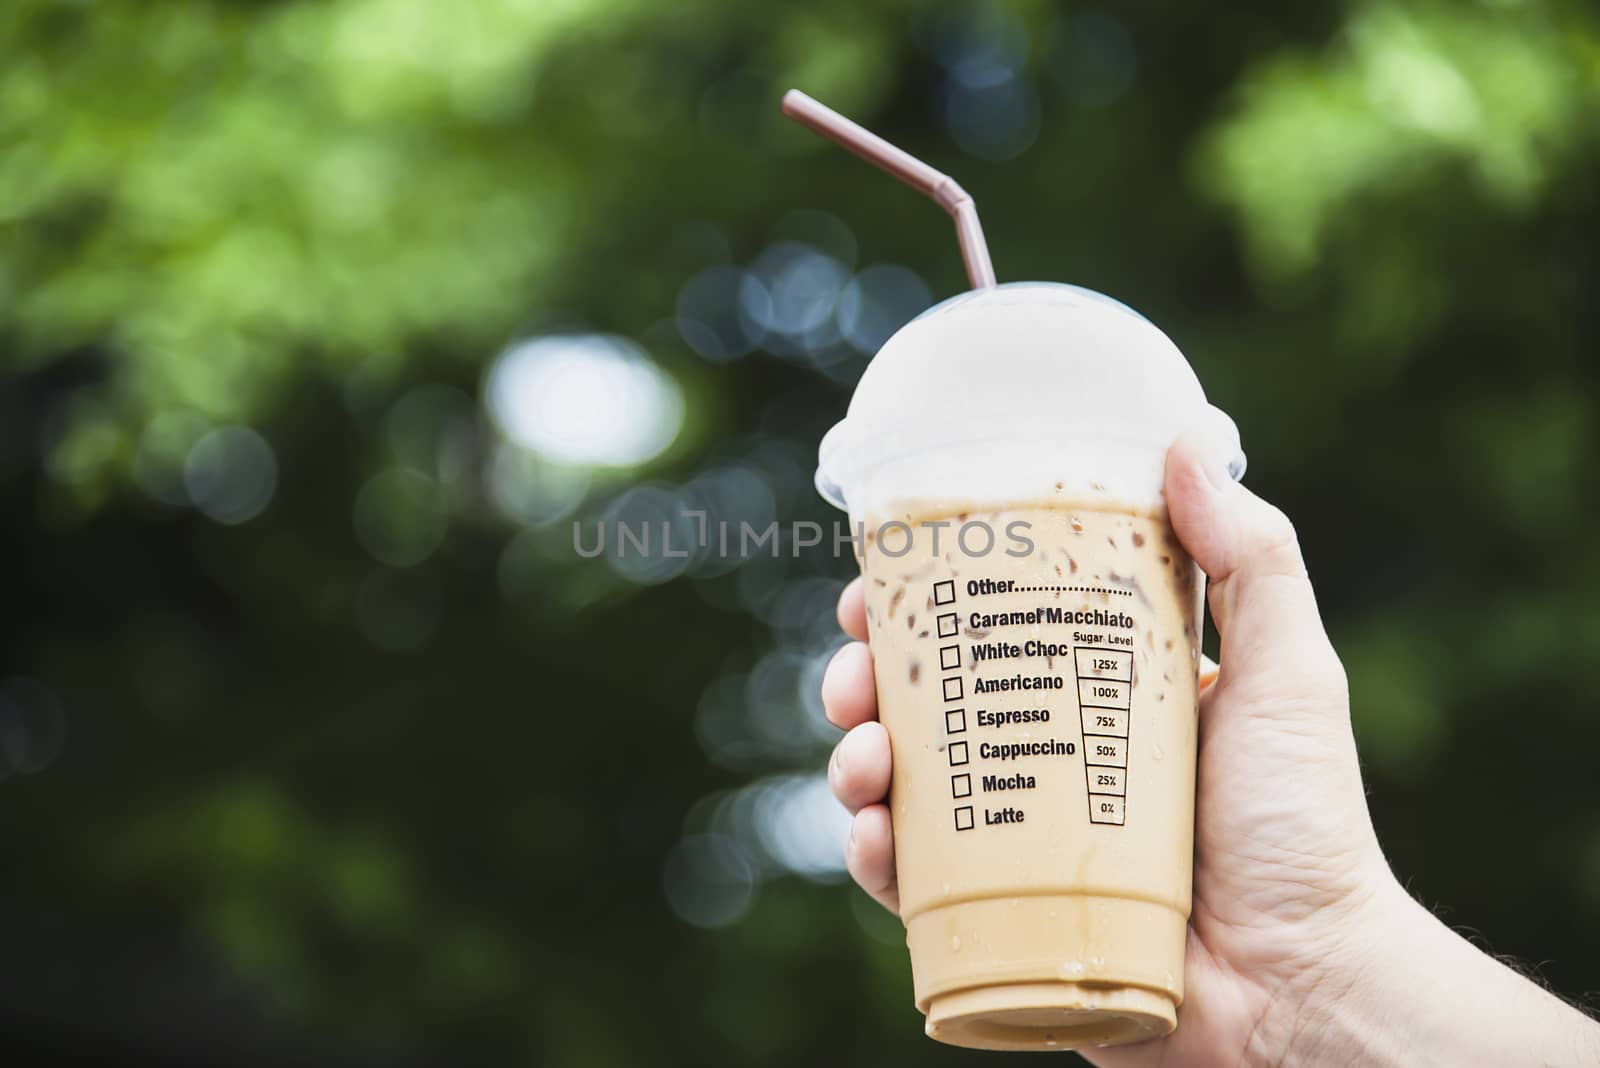 Hand showing fresh ice coffee cup - refreshment with ice coffee cup background concept